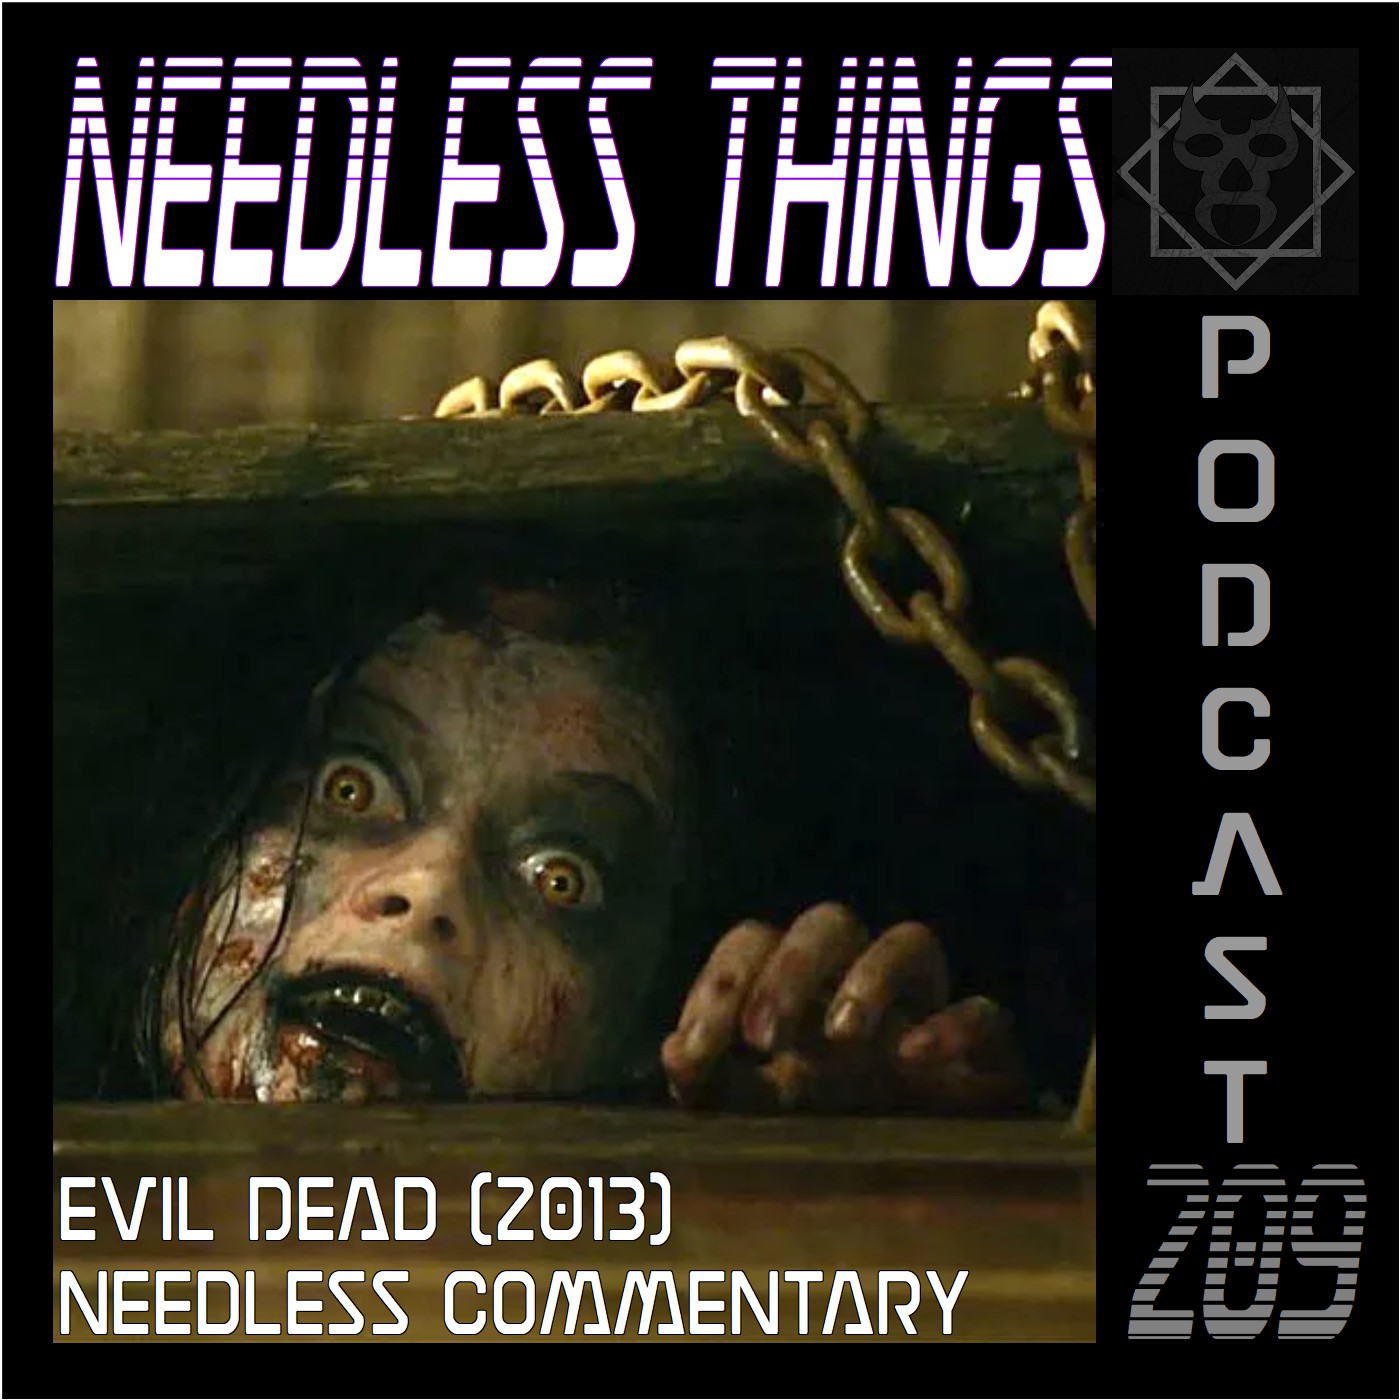 Needless Things Podcast 209 – Evil Dead (2013) Needless Commentary